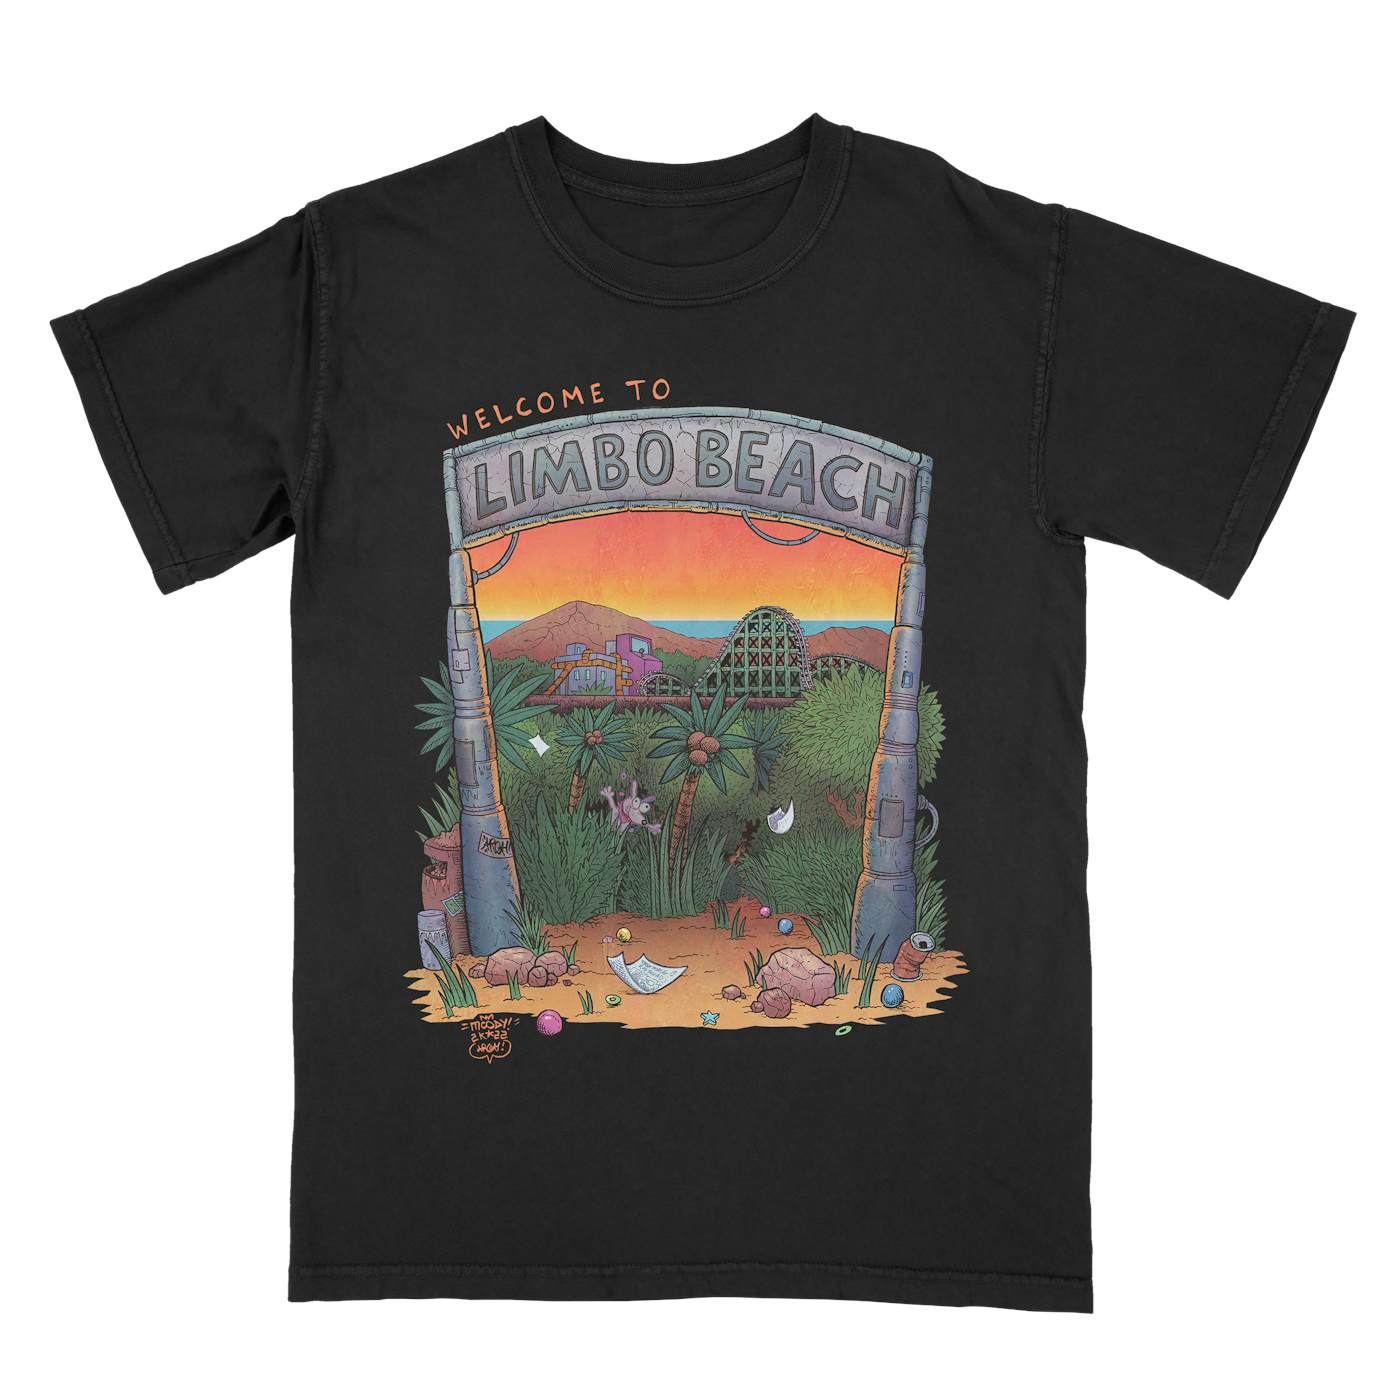  Vince Staples - T-Shirt - Welcome To Limbo Beach